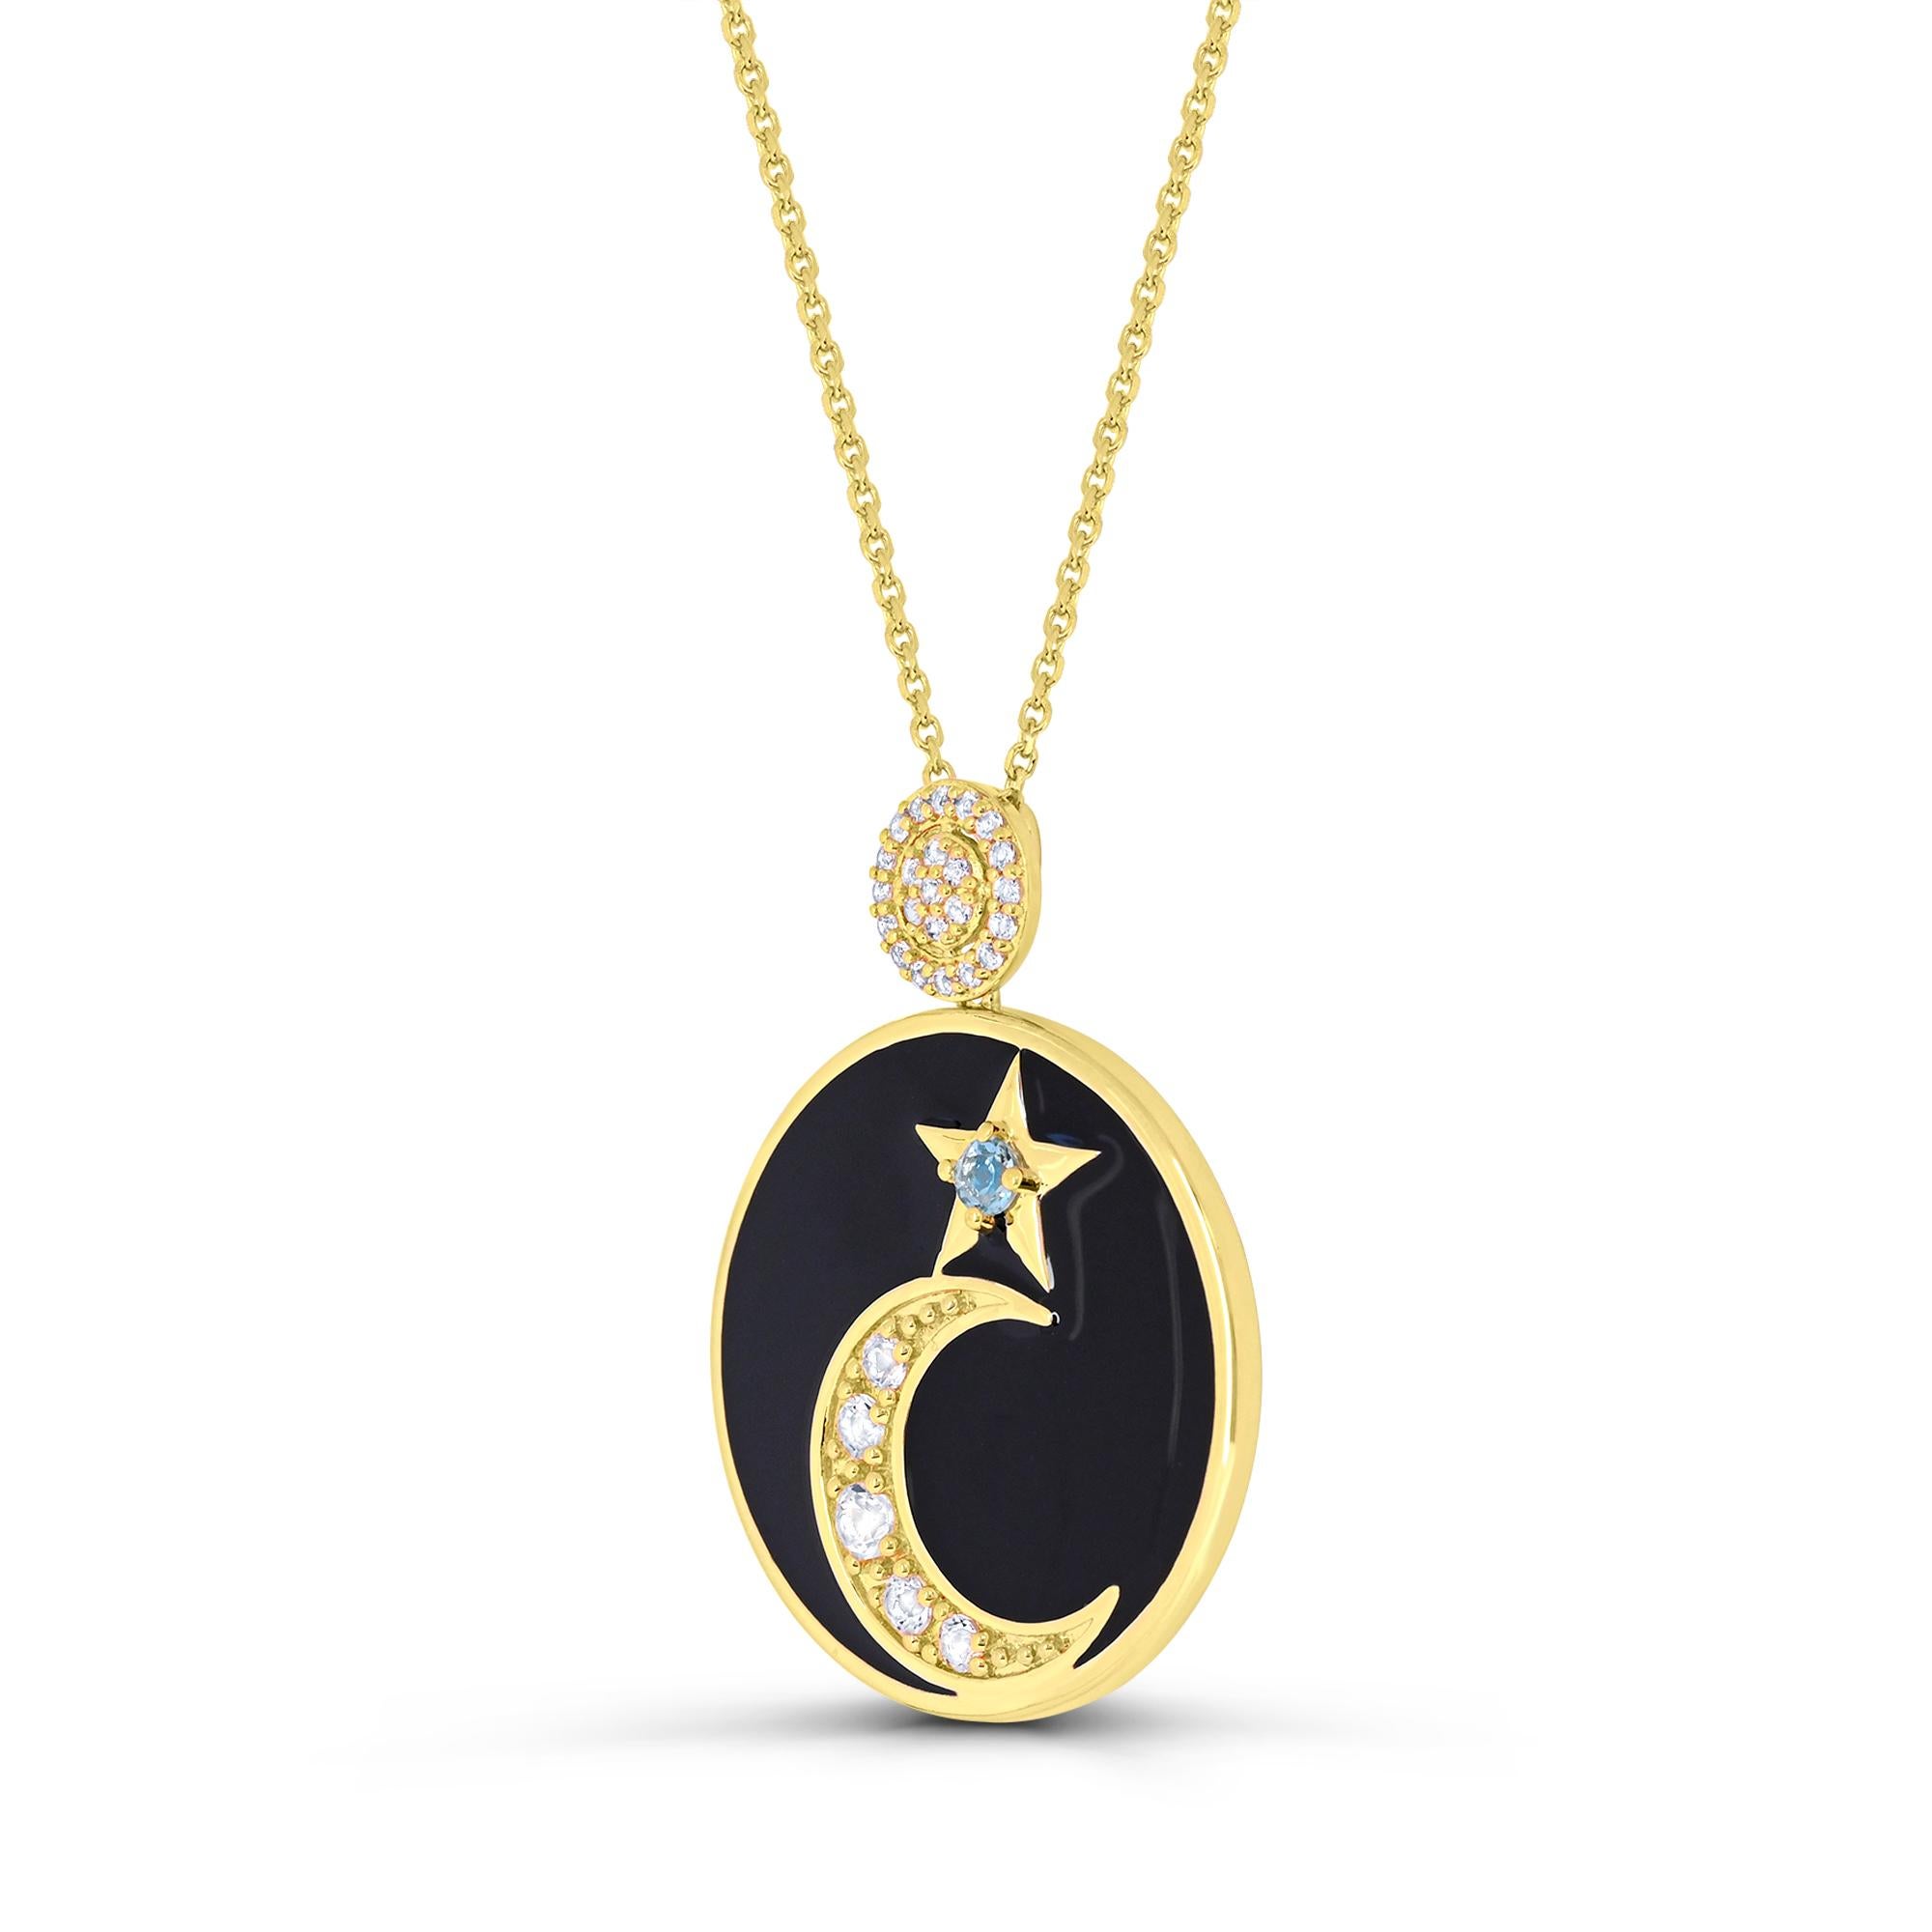 Indulge in the elegance of our Swiss Blue Topaz and White Topaz Accented Star and Crescent Moon Enamel Pendant Necklace in 14K Yellow Gold over Sterling Silver. This necklace boasts a stunning combination of one gold tone star and one crescent moon